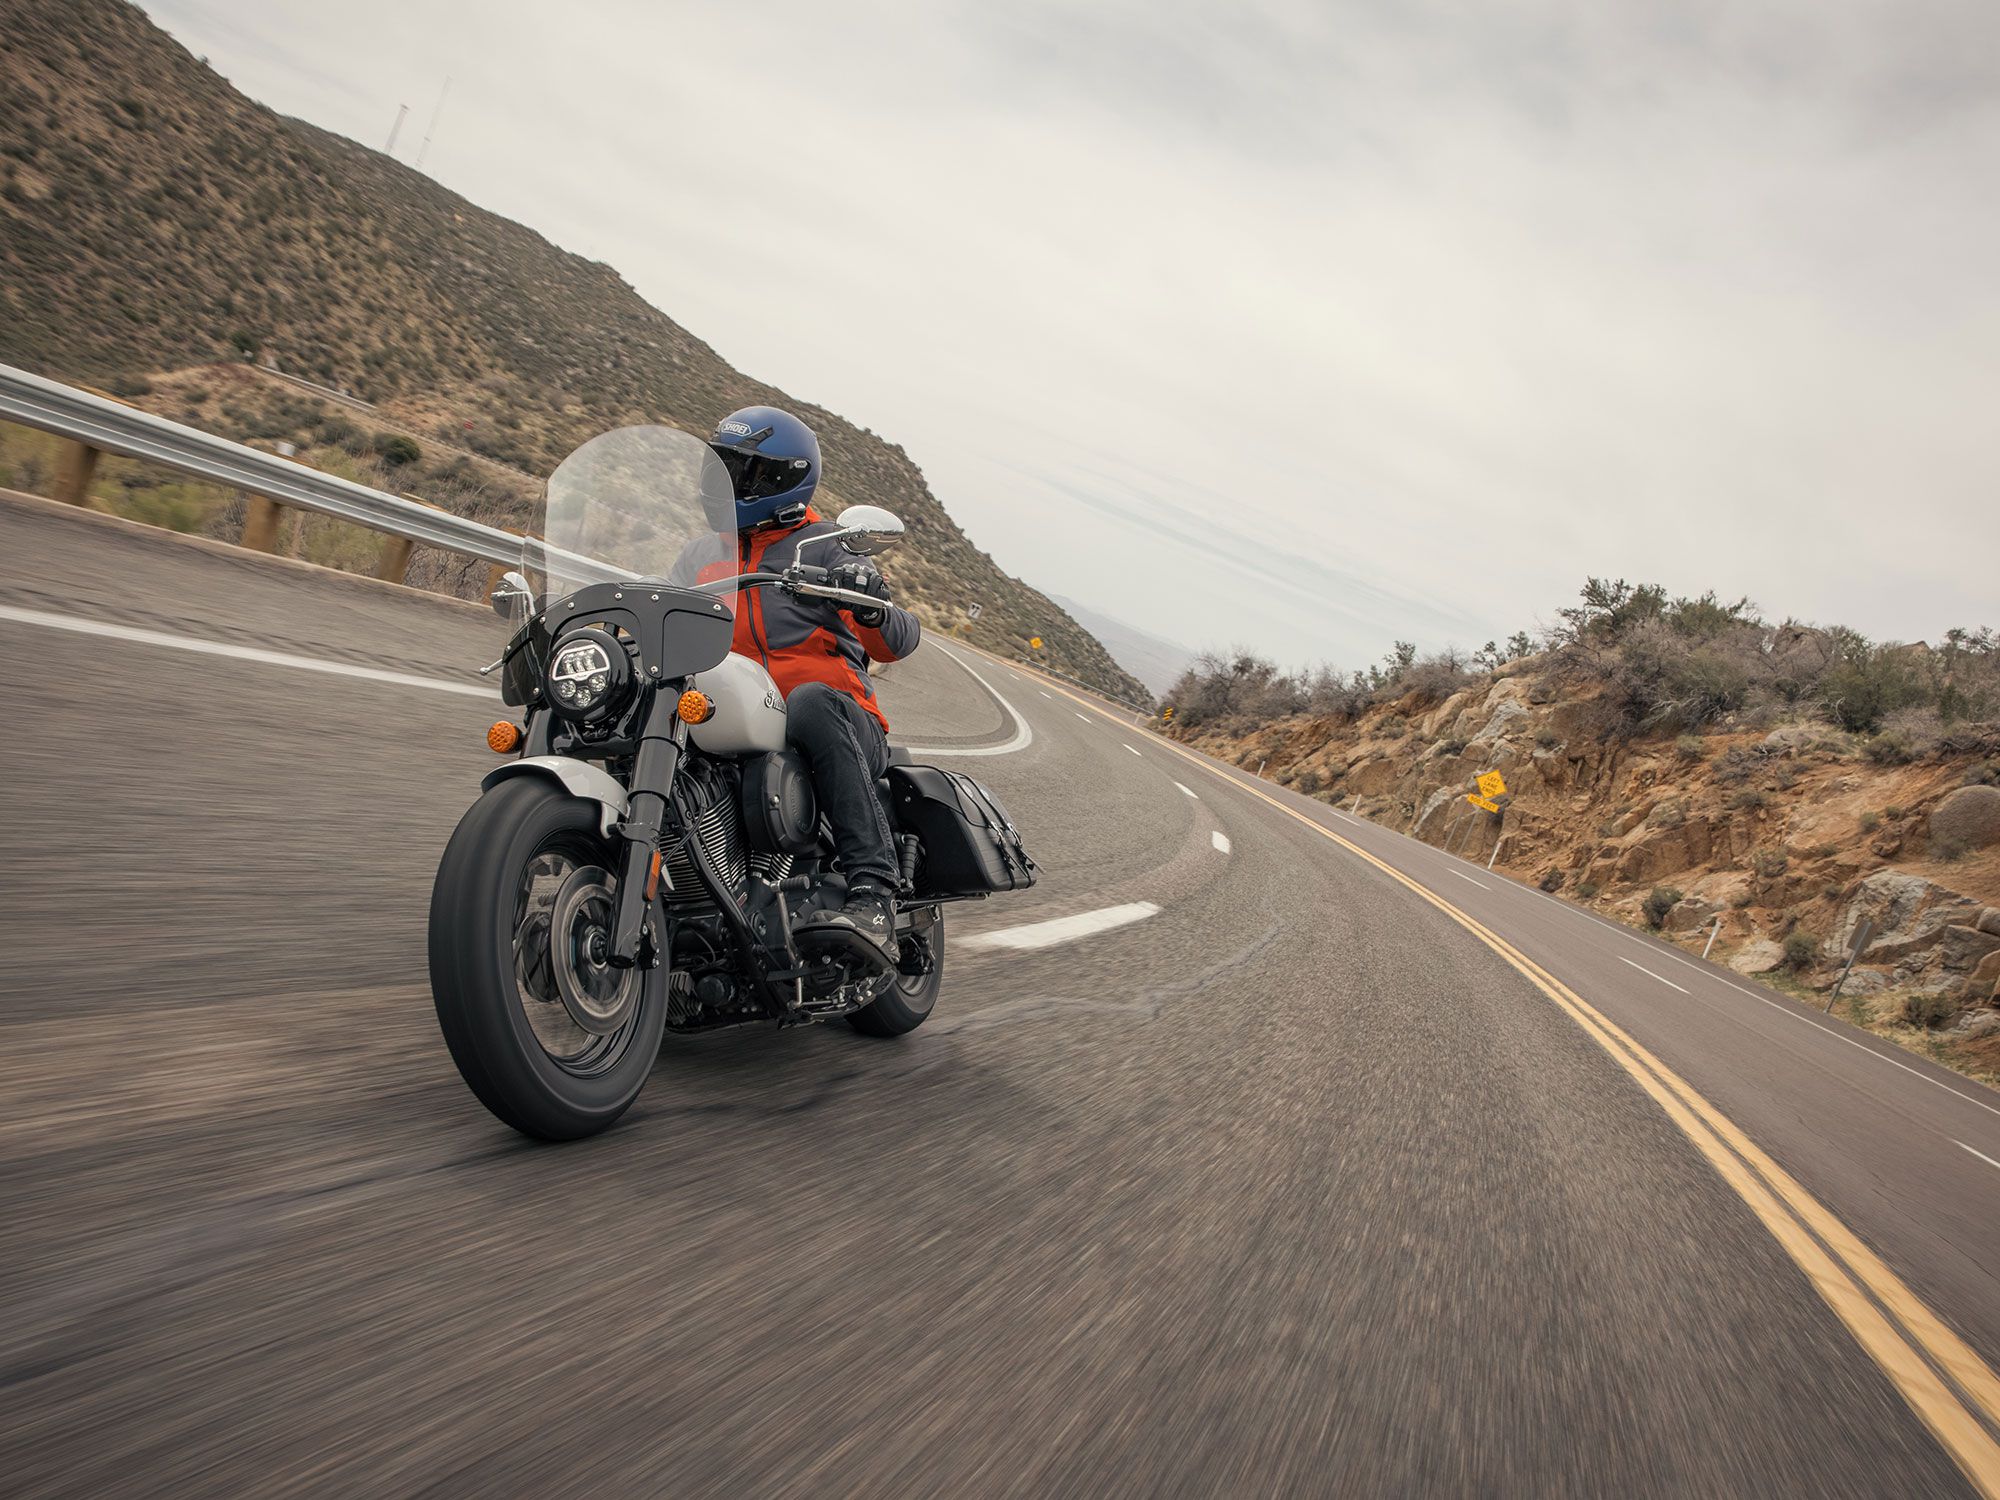 Saddle up aboard the 2022 Indian Motorcycle Super Chief— a heavyweight V-twin cruiser from legendary Indian Motorcycle brand.